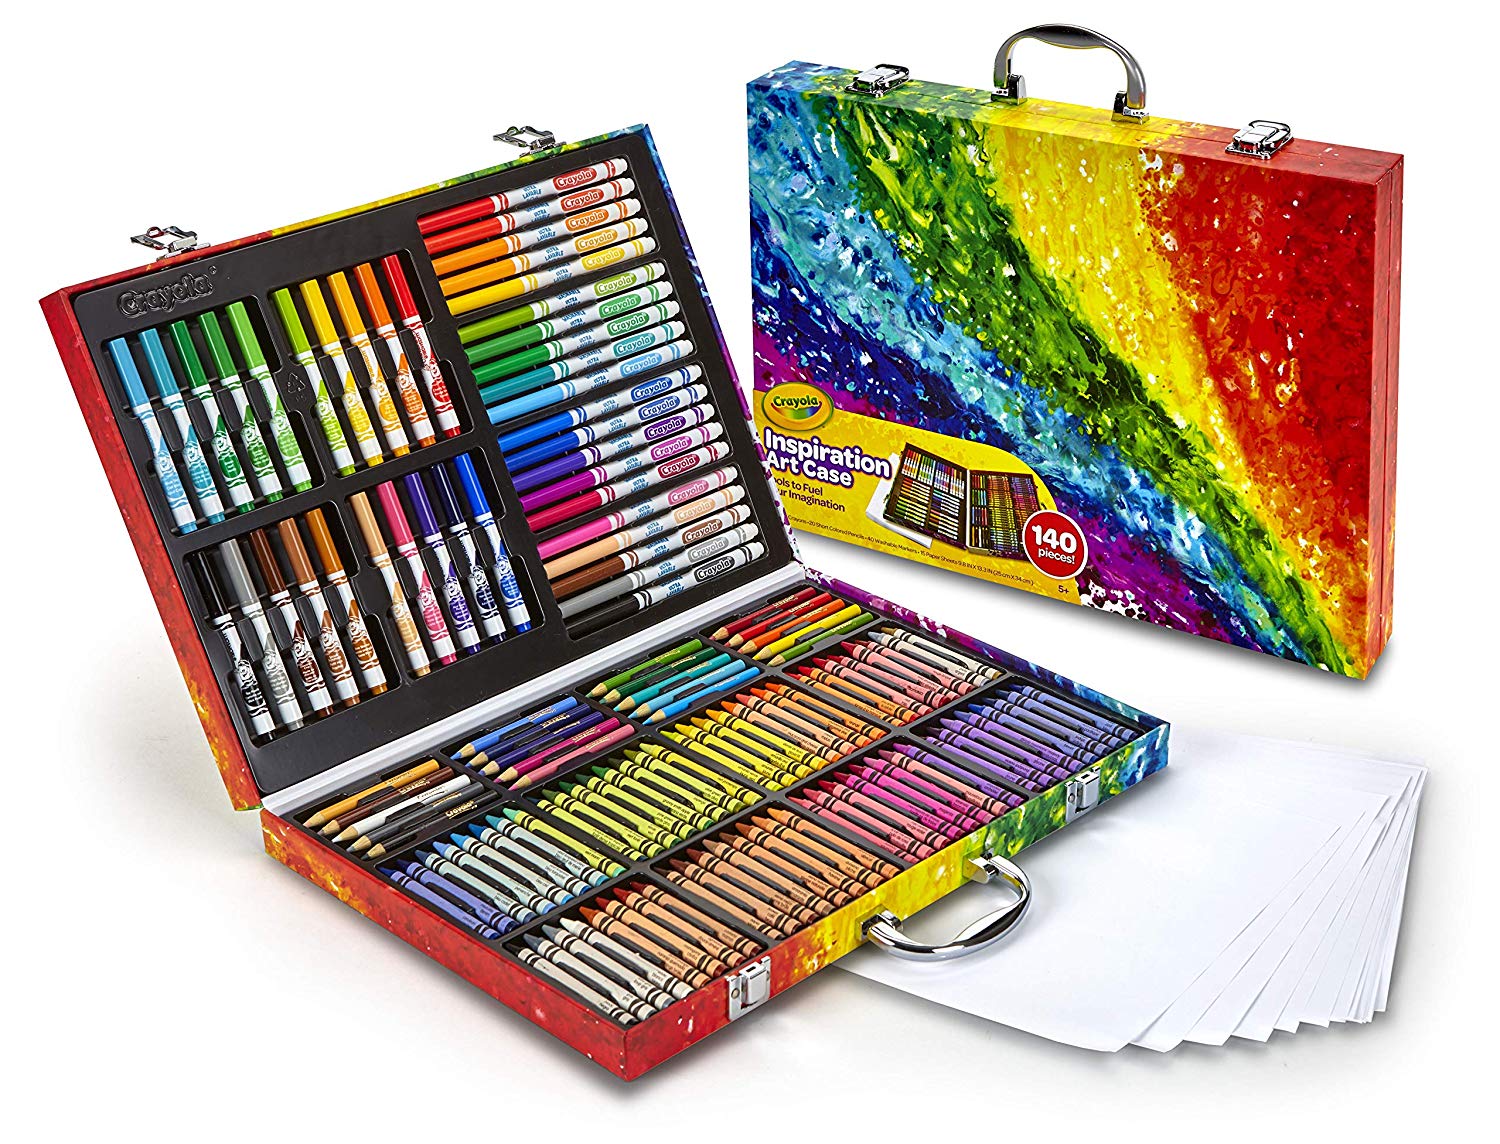 Crayola Inspiration Art Case Only $14.99! - Become a Coupon Queen